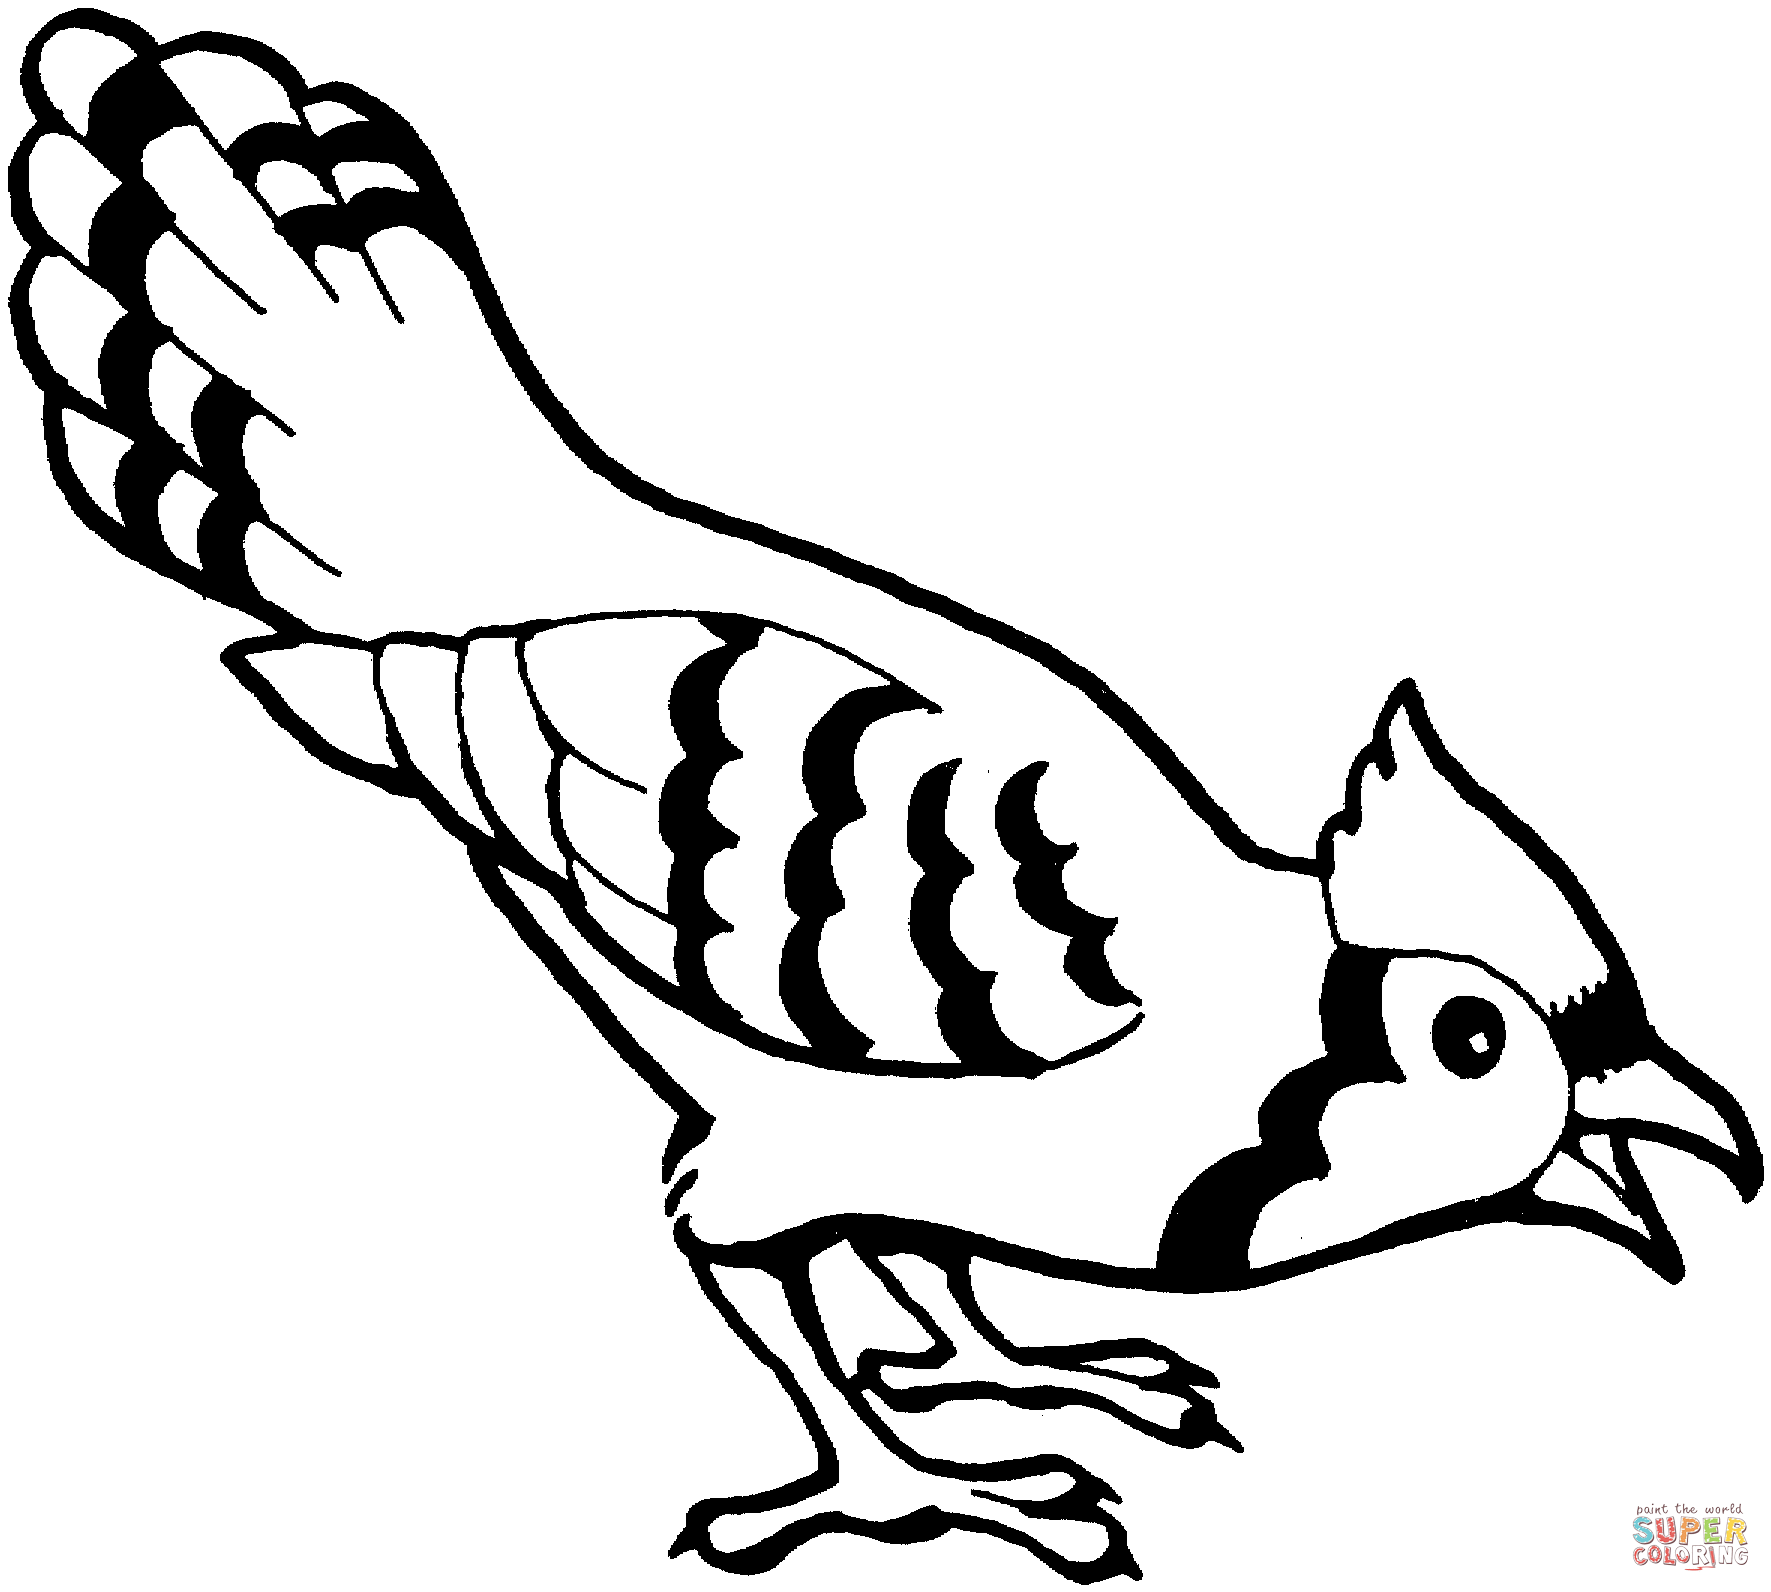 Blue Jay Bird coloring page | Free Printable Coloring Pages